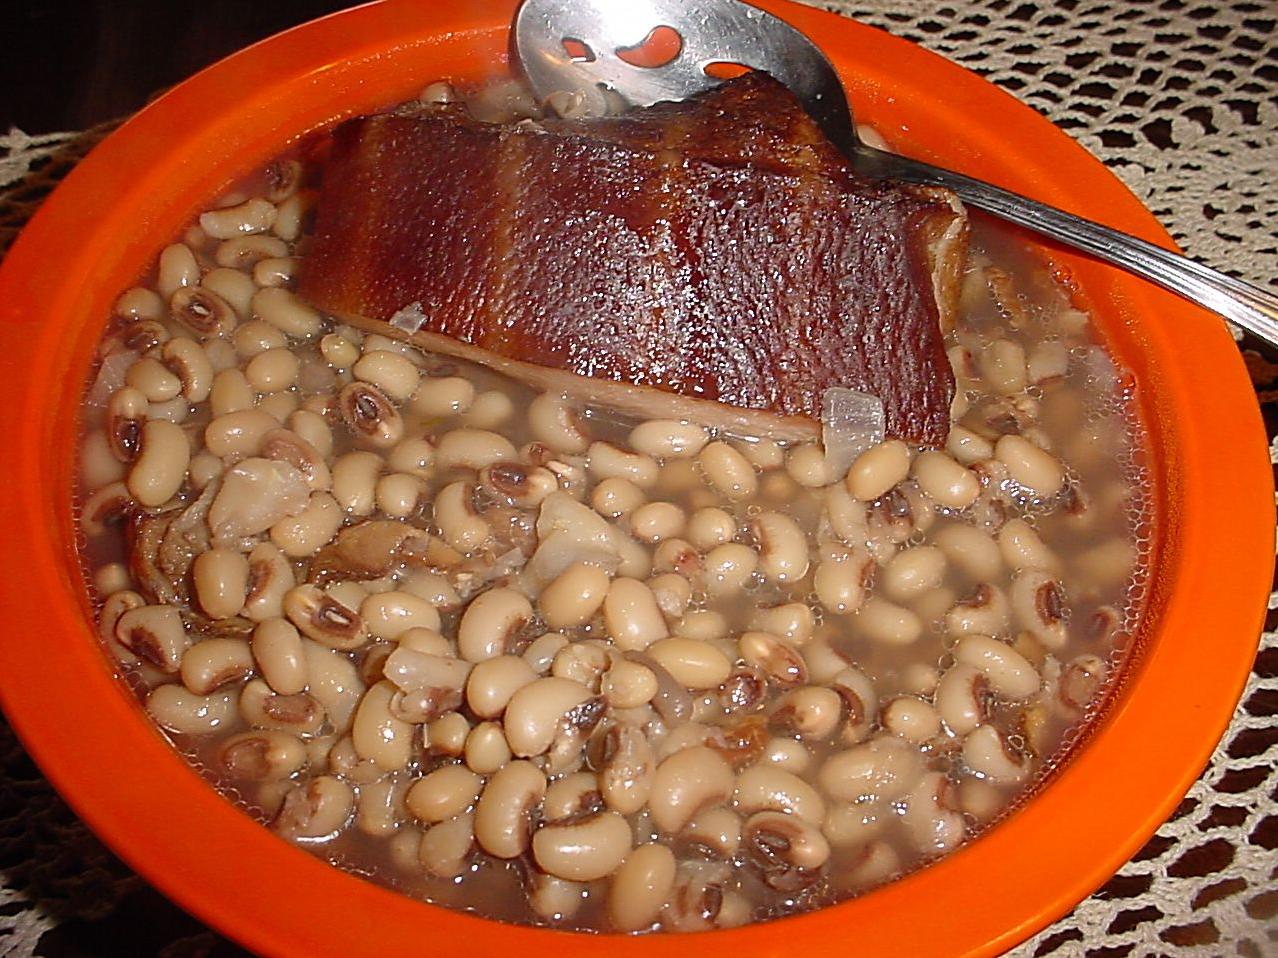  Fresh black-eyed peas are the star of this southern dish.